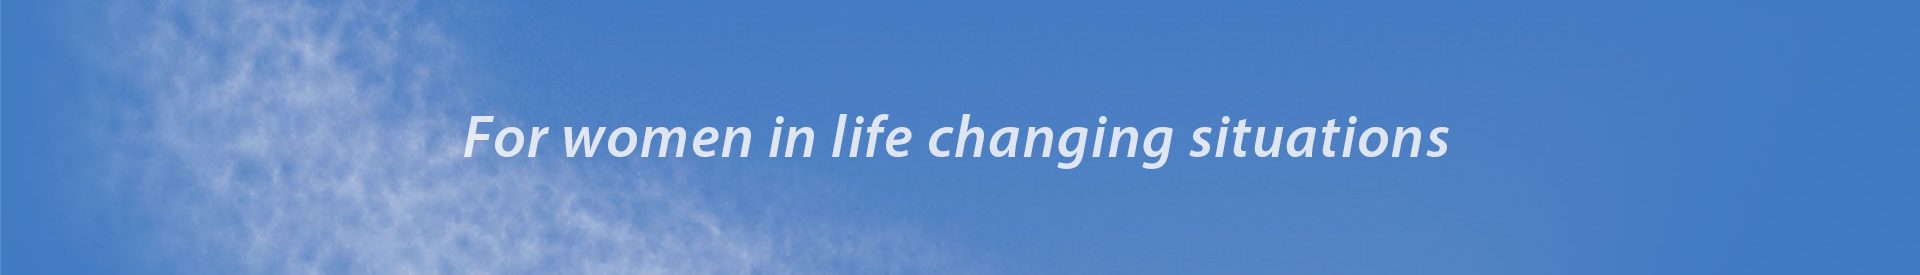 Blue Skies - For women in life changing situations